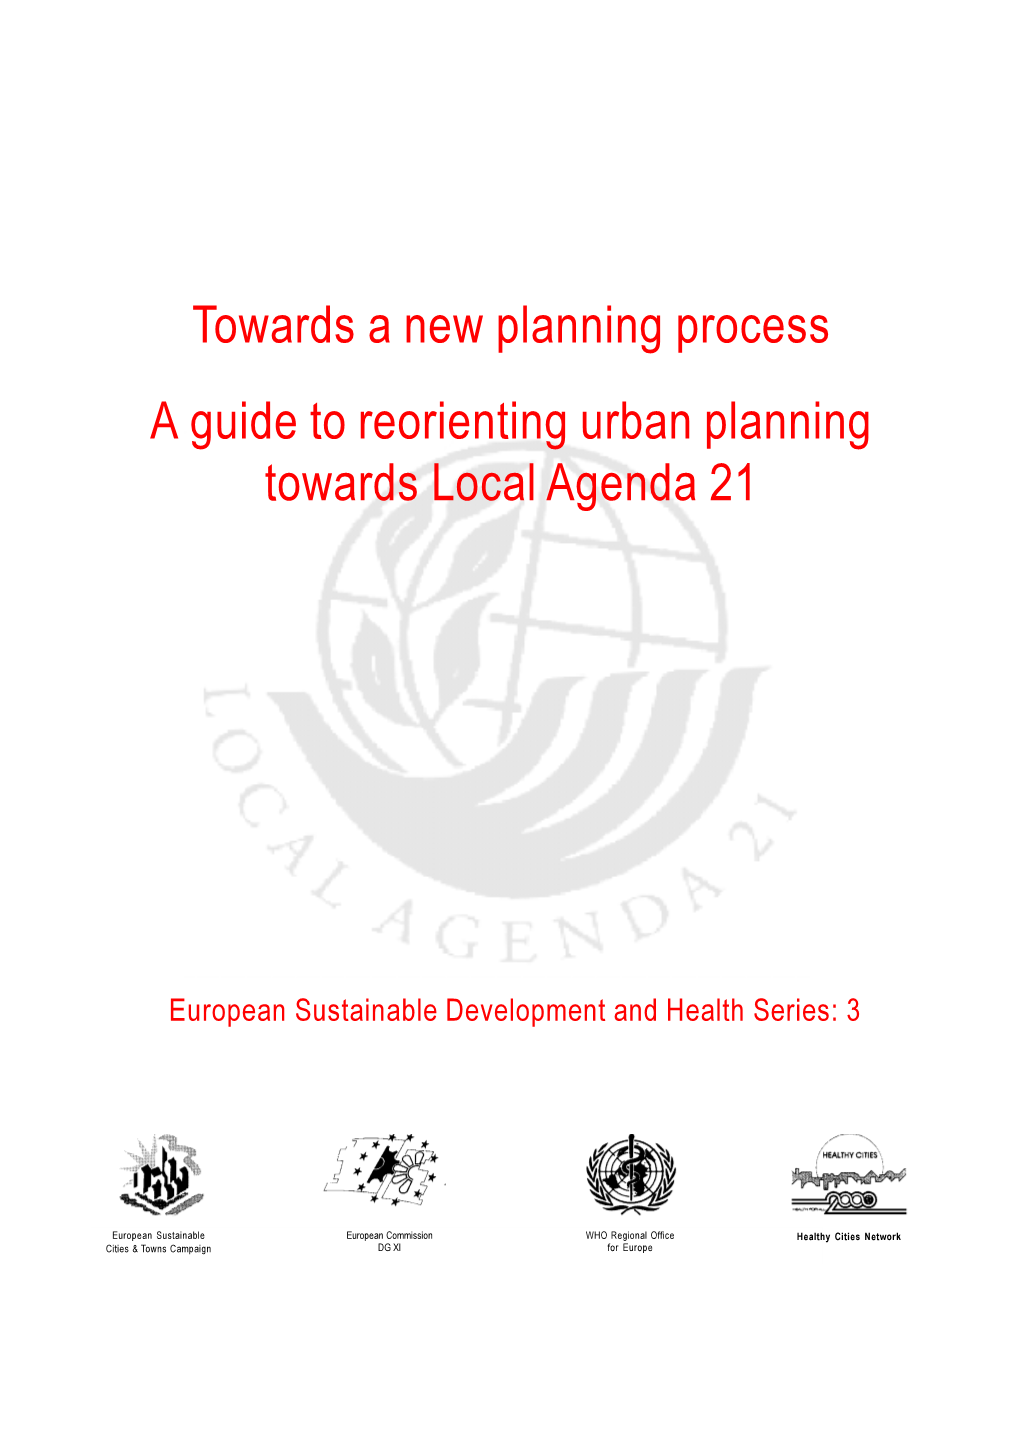 Towards a New Planning Process a Guide to Reorienting Urban Planning Towards Local Agenda 21